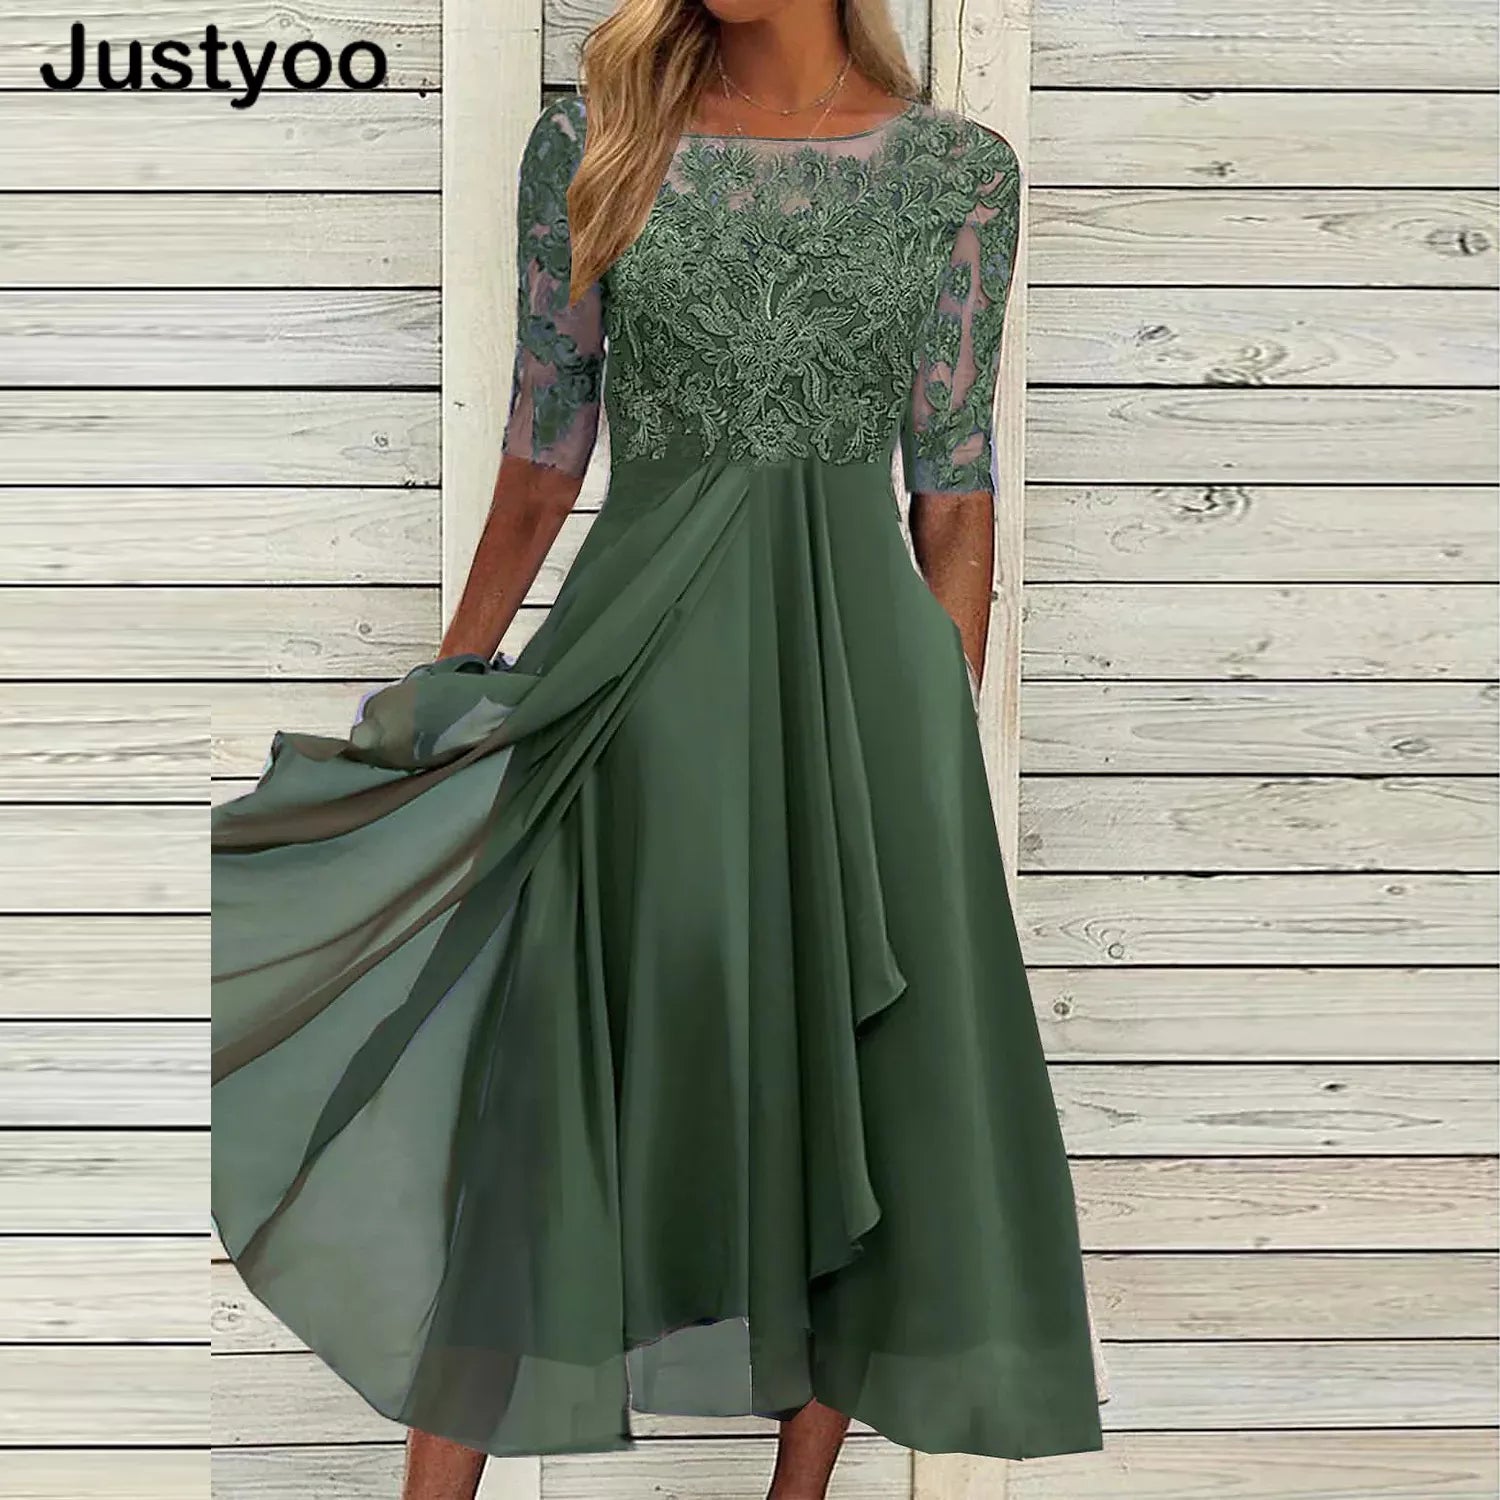 Women's Elegant Green A-Line Party Dress with O-Neck, Lace Half Sleeves, and Long Boho Design